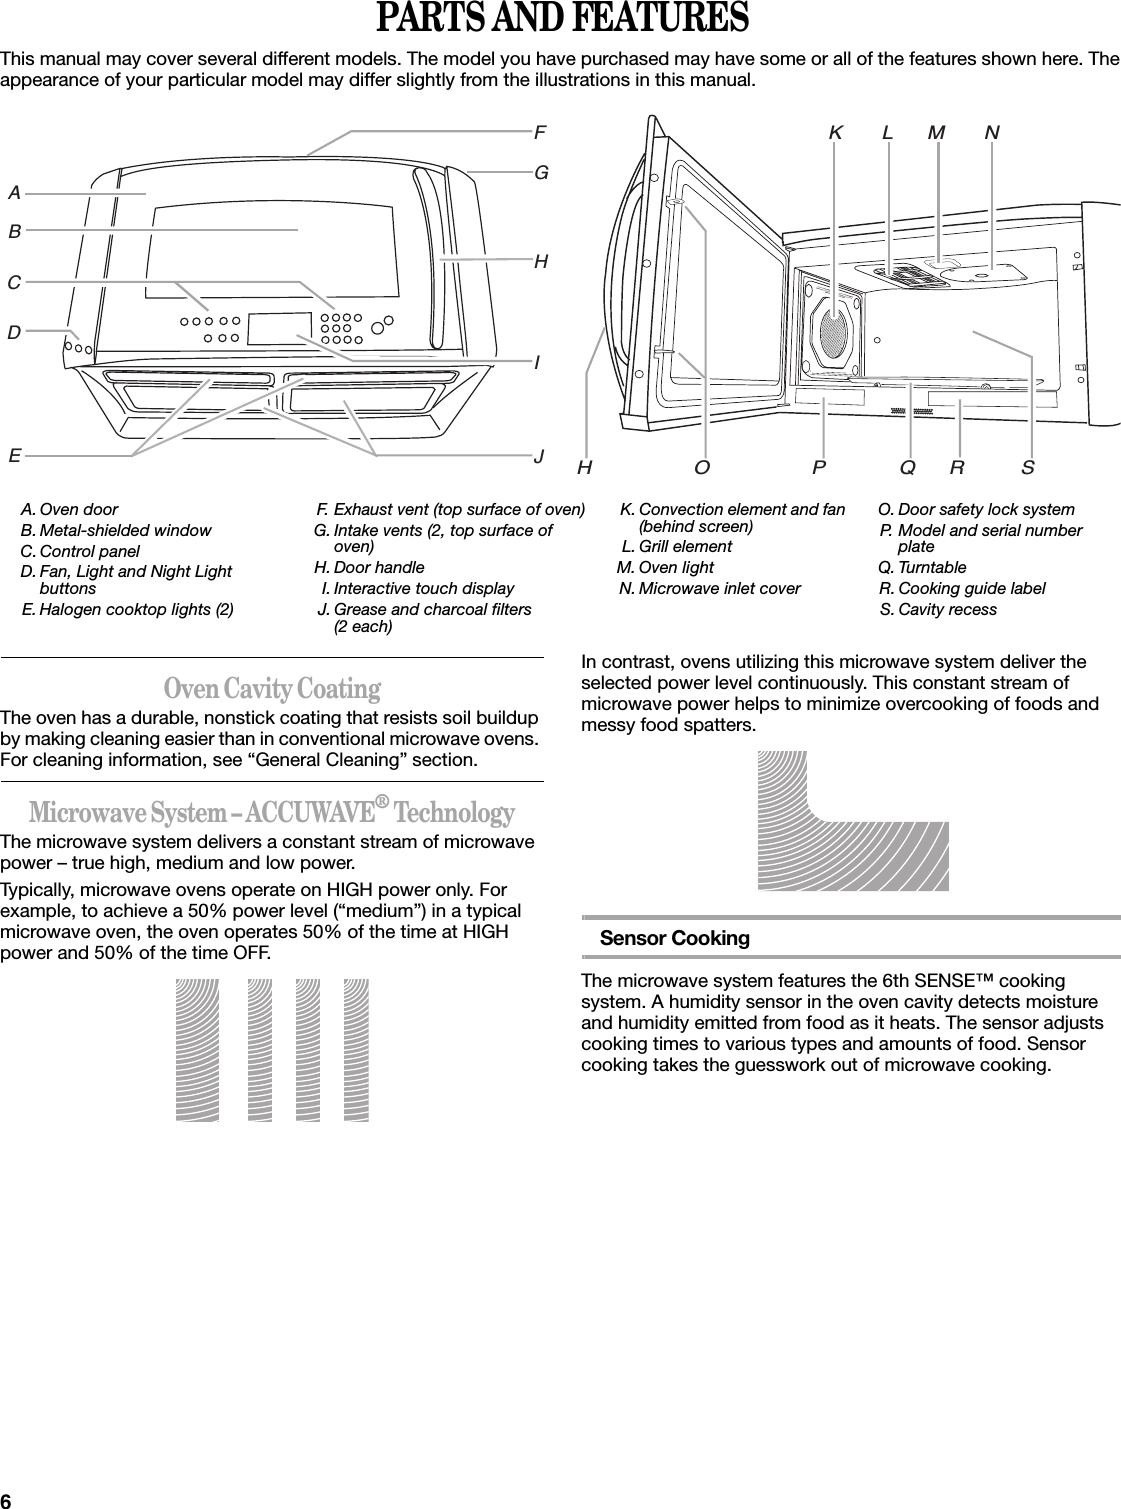 6PARTS AND FEATURESThis manual may cover several different models. The model you have purchased may have some or all of the features shown here. The appearance of your particular model may differ slightly from the illustrations in this manual.Oven Cavity CoatingThe oven has a durable, nonstick coating that resists soil buildup by making cleaning easier than in conventional microwave ovens. For cleaning information, see “General Cleaning” section.Microwave System – ACCUWAVE® TechnologyThe microwave system delivers a constant stream of microwave power – true high, medium and low power.Typically, microwave ovens operate on HIGH power only. For example, to achieve a 50% power level (“medium”) in a typical microwave oven, the oven operates 50% of the time at HIGH power and 50% of the time OFF. In contrast, ovens utilizing this microwave system deliver the selected power level continuously. This constant stream of microwave power helps to minimize overcooking of foods and messy food spatters.Sensor CookingThe microwave system features the 6th SENSE™ cooking system. A humidity sensor in the oven cavity detects moisture and humidity emitted from food as it heats. The sensor adjusts cooking times to various types and amounts of food. Sensor cooking takes the guesswork out of microwave cooking.A. Oven doorB. Metal-shielded windowC. Control panelD. Fan, Light and Night Light buttonsE. Halogen cooktop lights (2)F. Exhaust vent (top surface of oven)G. Intake vents (2, top surface of oven)H. Door handleI. Interactive touch displayJ. Grease and charcoal filters (2 each)K. Convection element and fan (behind screen)L. Grill elementM. Oven lightN. Microwave inlet coverO. Door safety lock systemP. Model and serial number plateQ. TurntableR. Cooking guide labelS. Cavity recessABCDEFGHIJ K       L      M       NH                  O                  P             Q      R          S